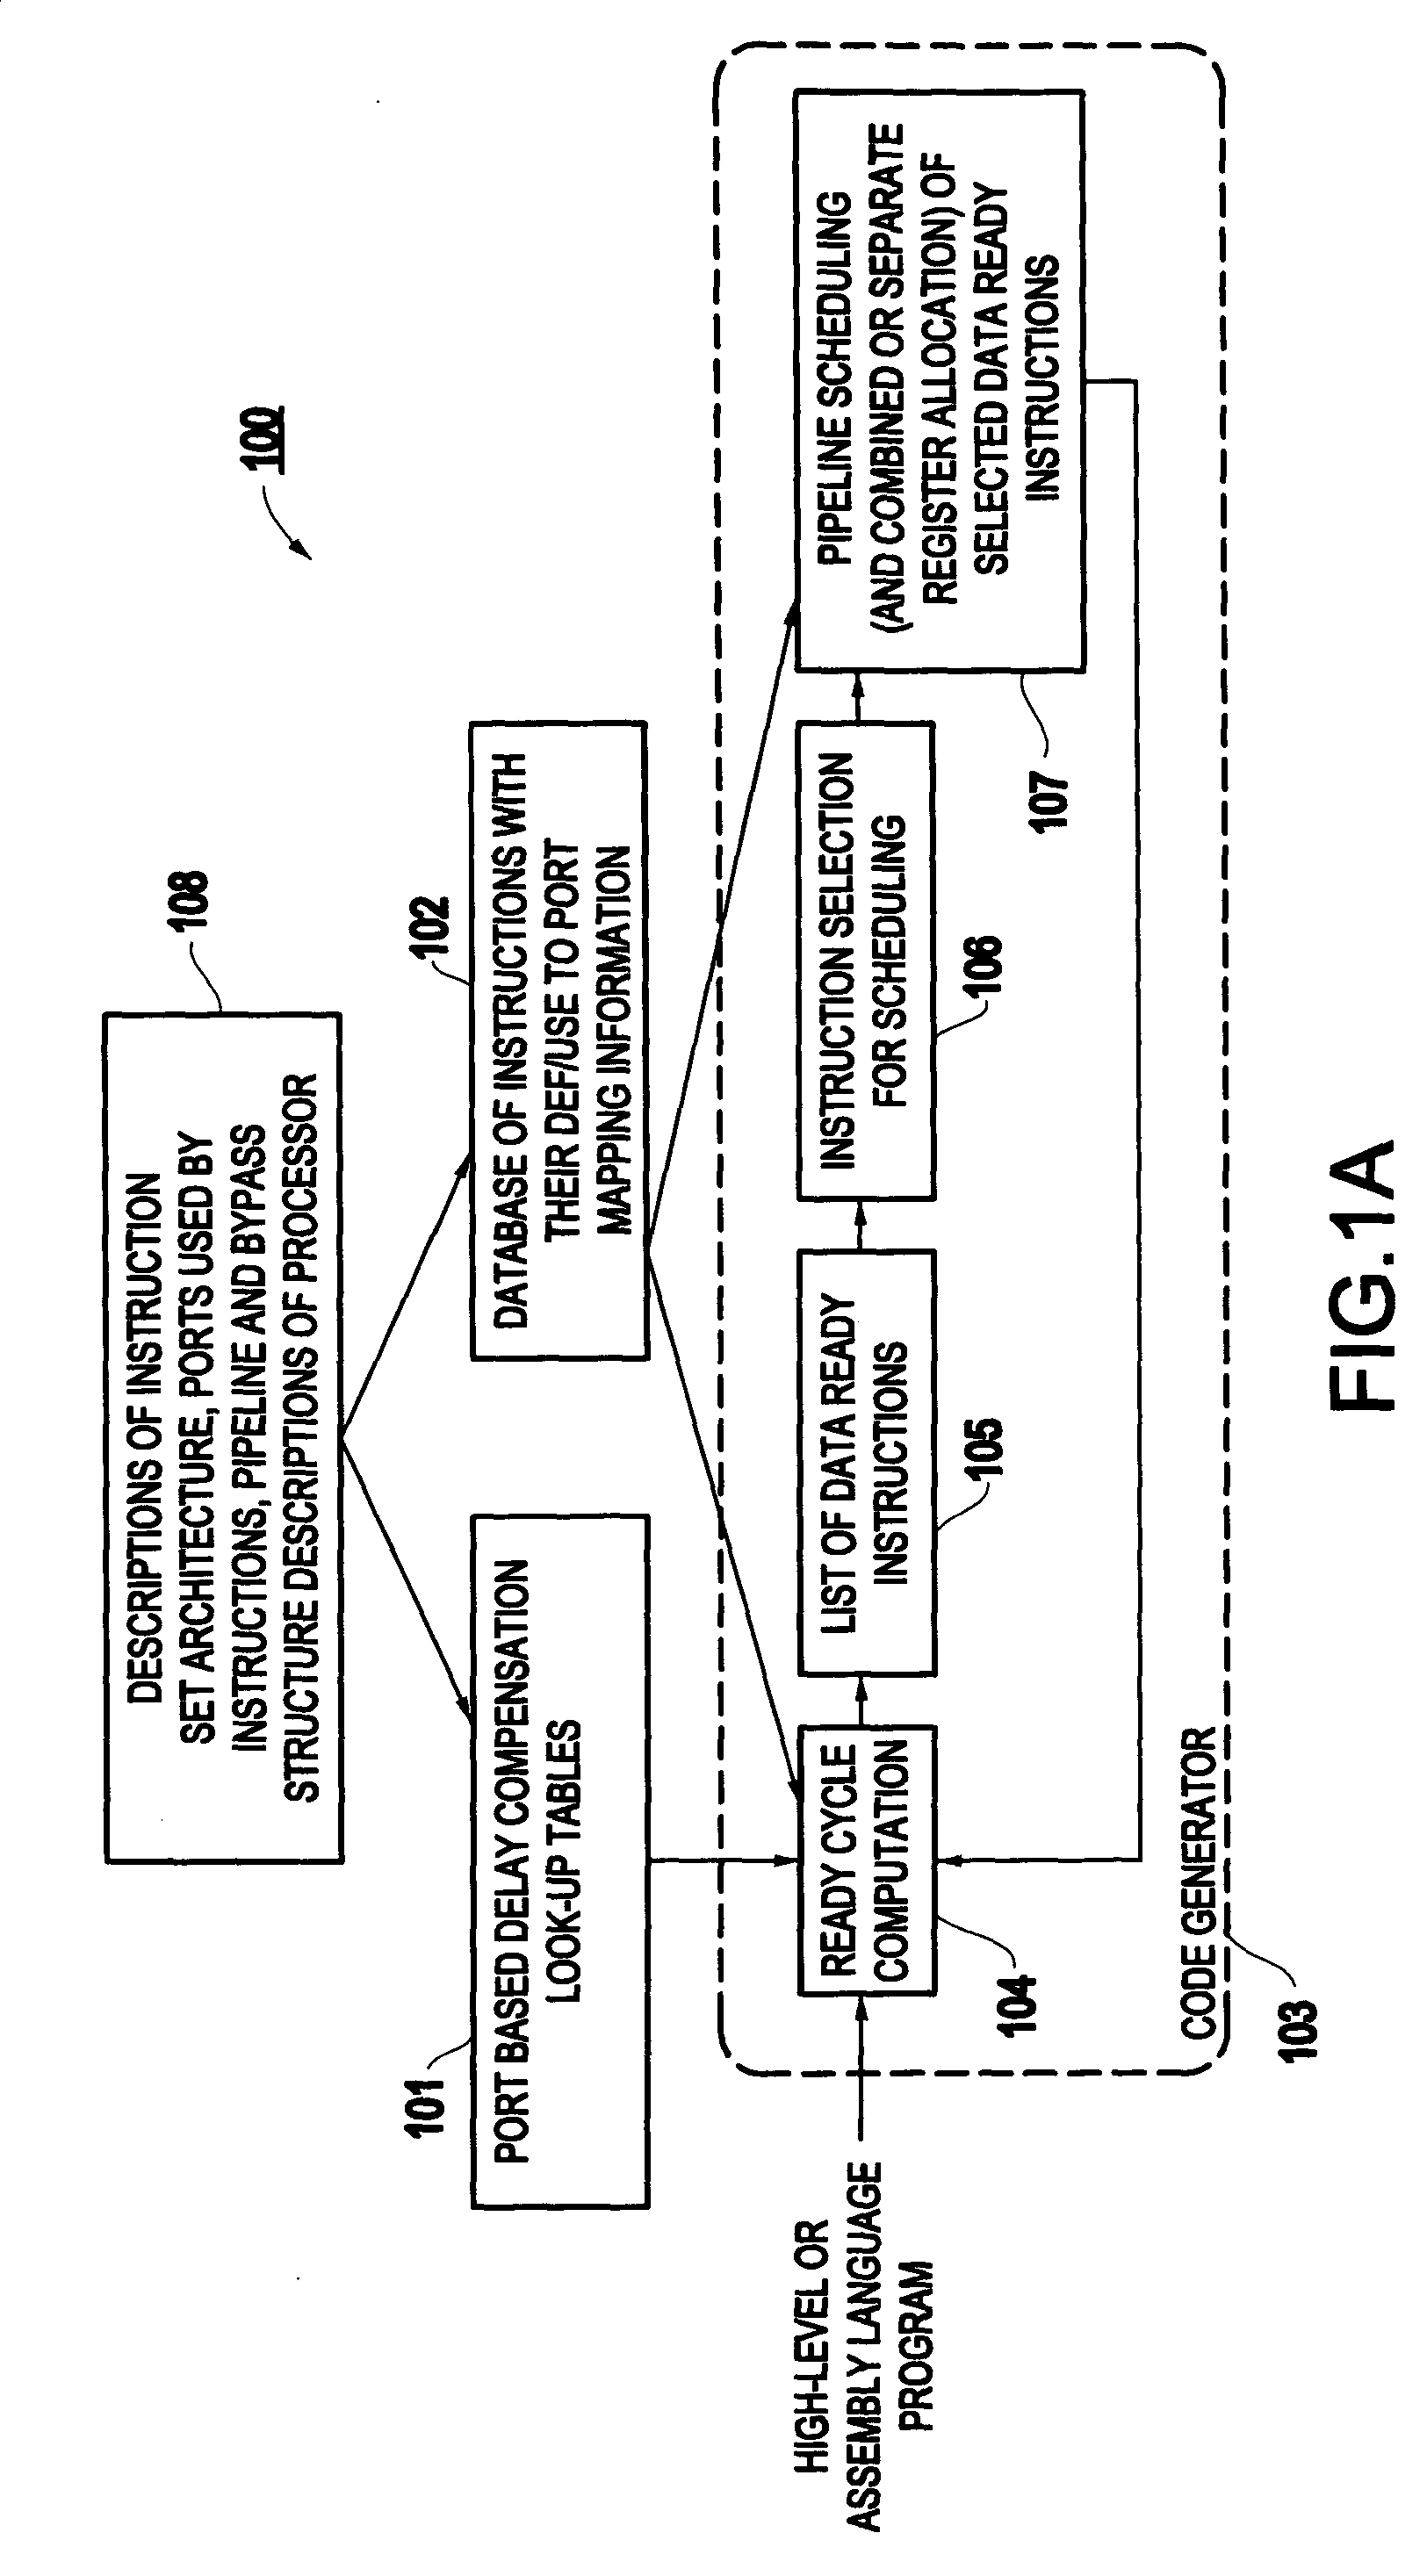 Method and system for modeling non-interlocked diversely bypassed exposed pipeline processors for static scheduling